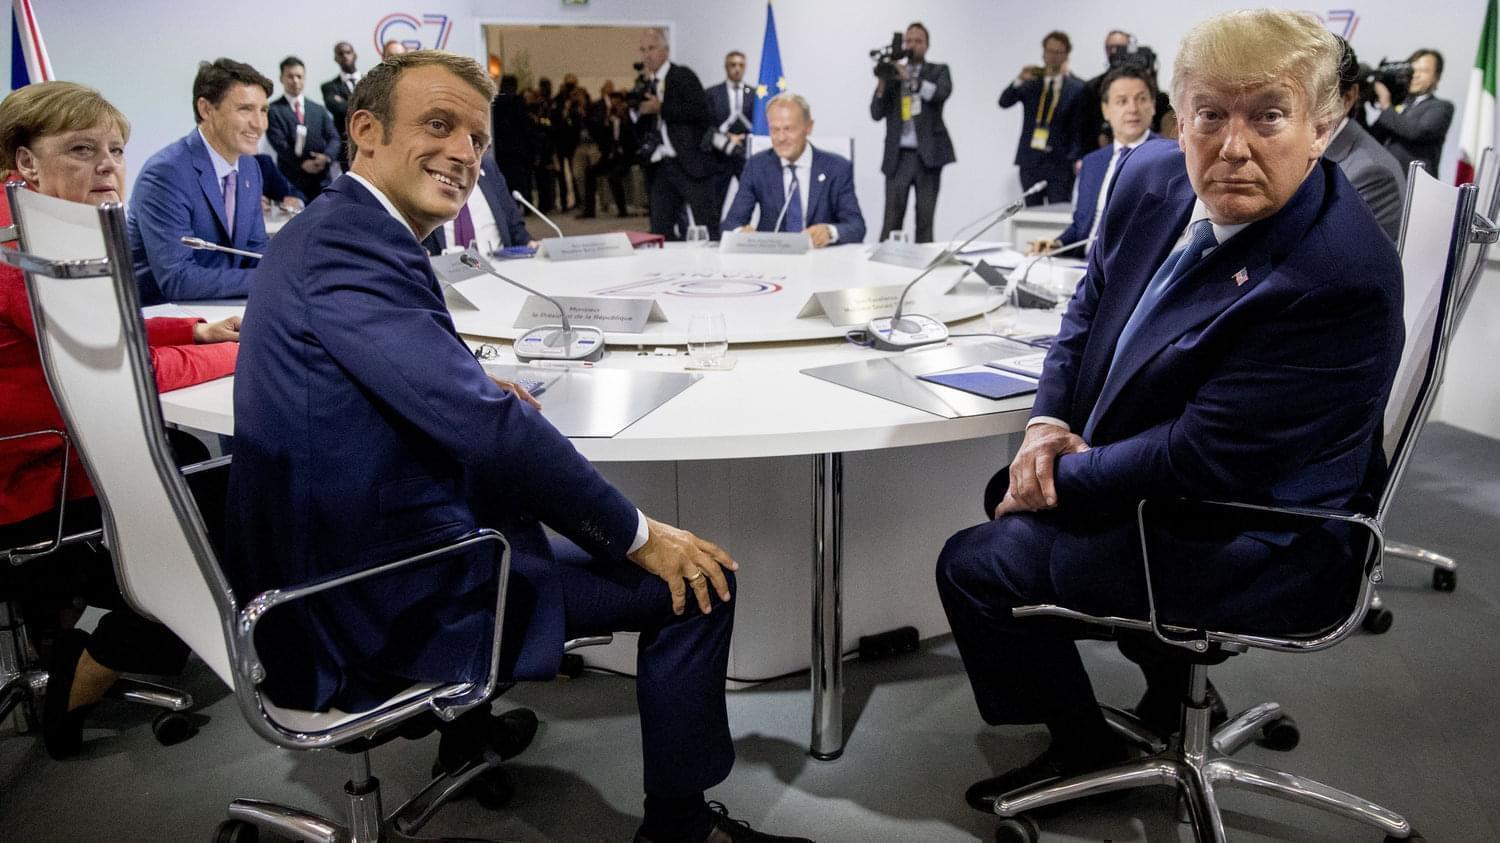 French President Emmanuel Macron (left) and President Trump participate in a G-7 working session. Trump is in Biarritz, France, for the G-7 summit of the world's biggest economic powers.